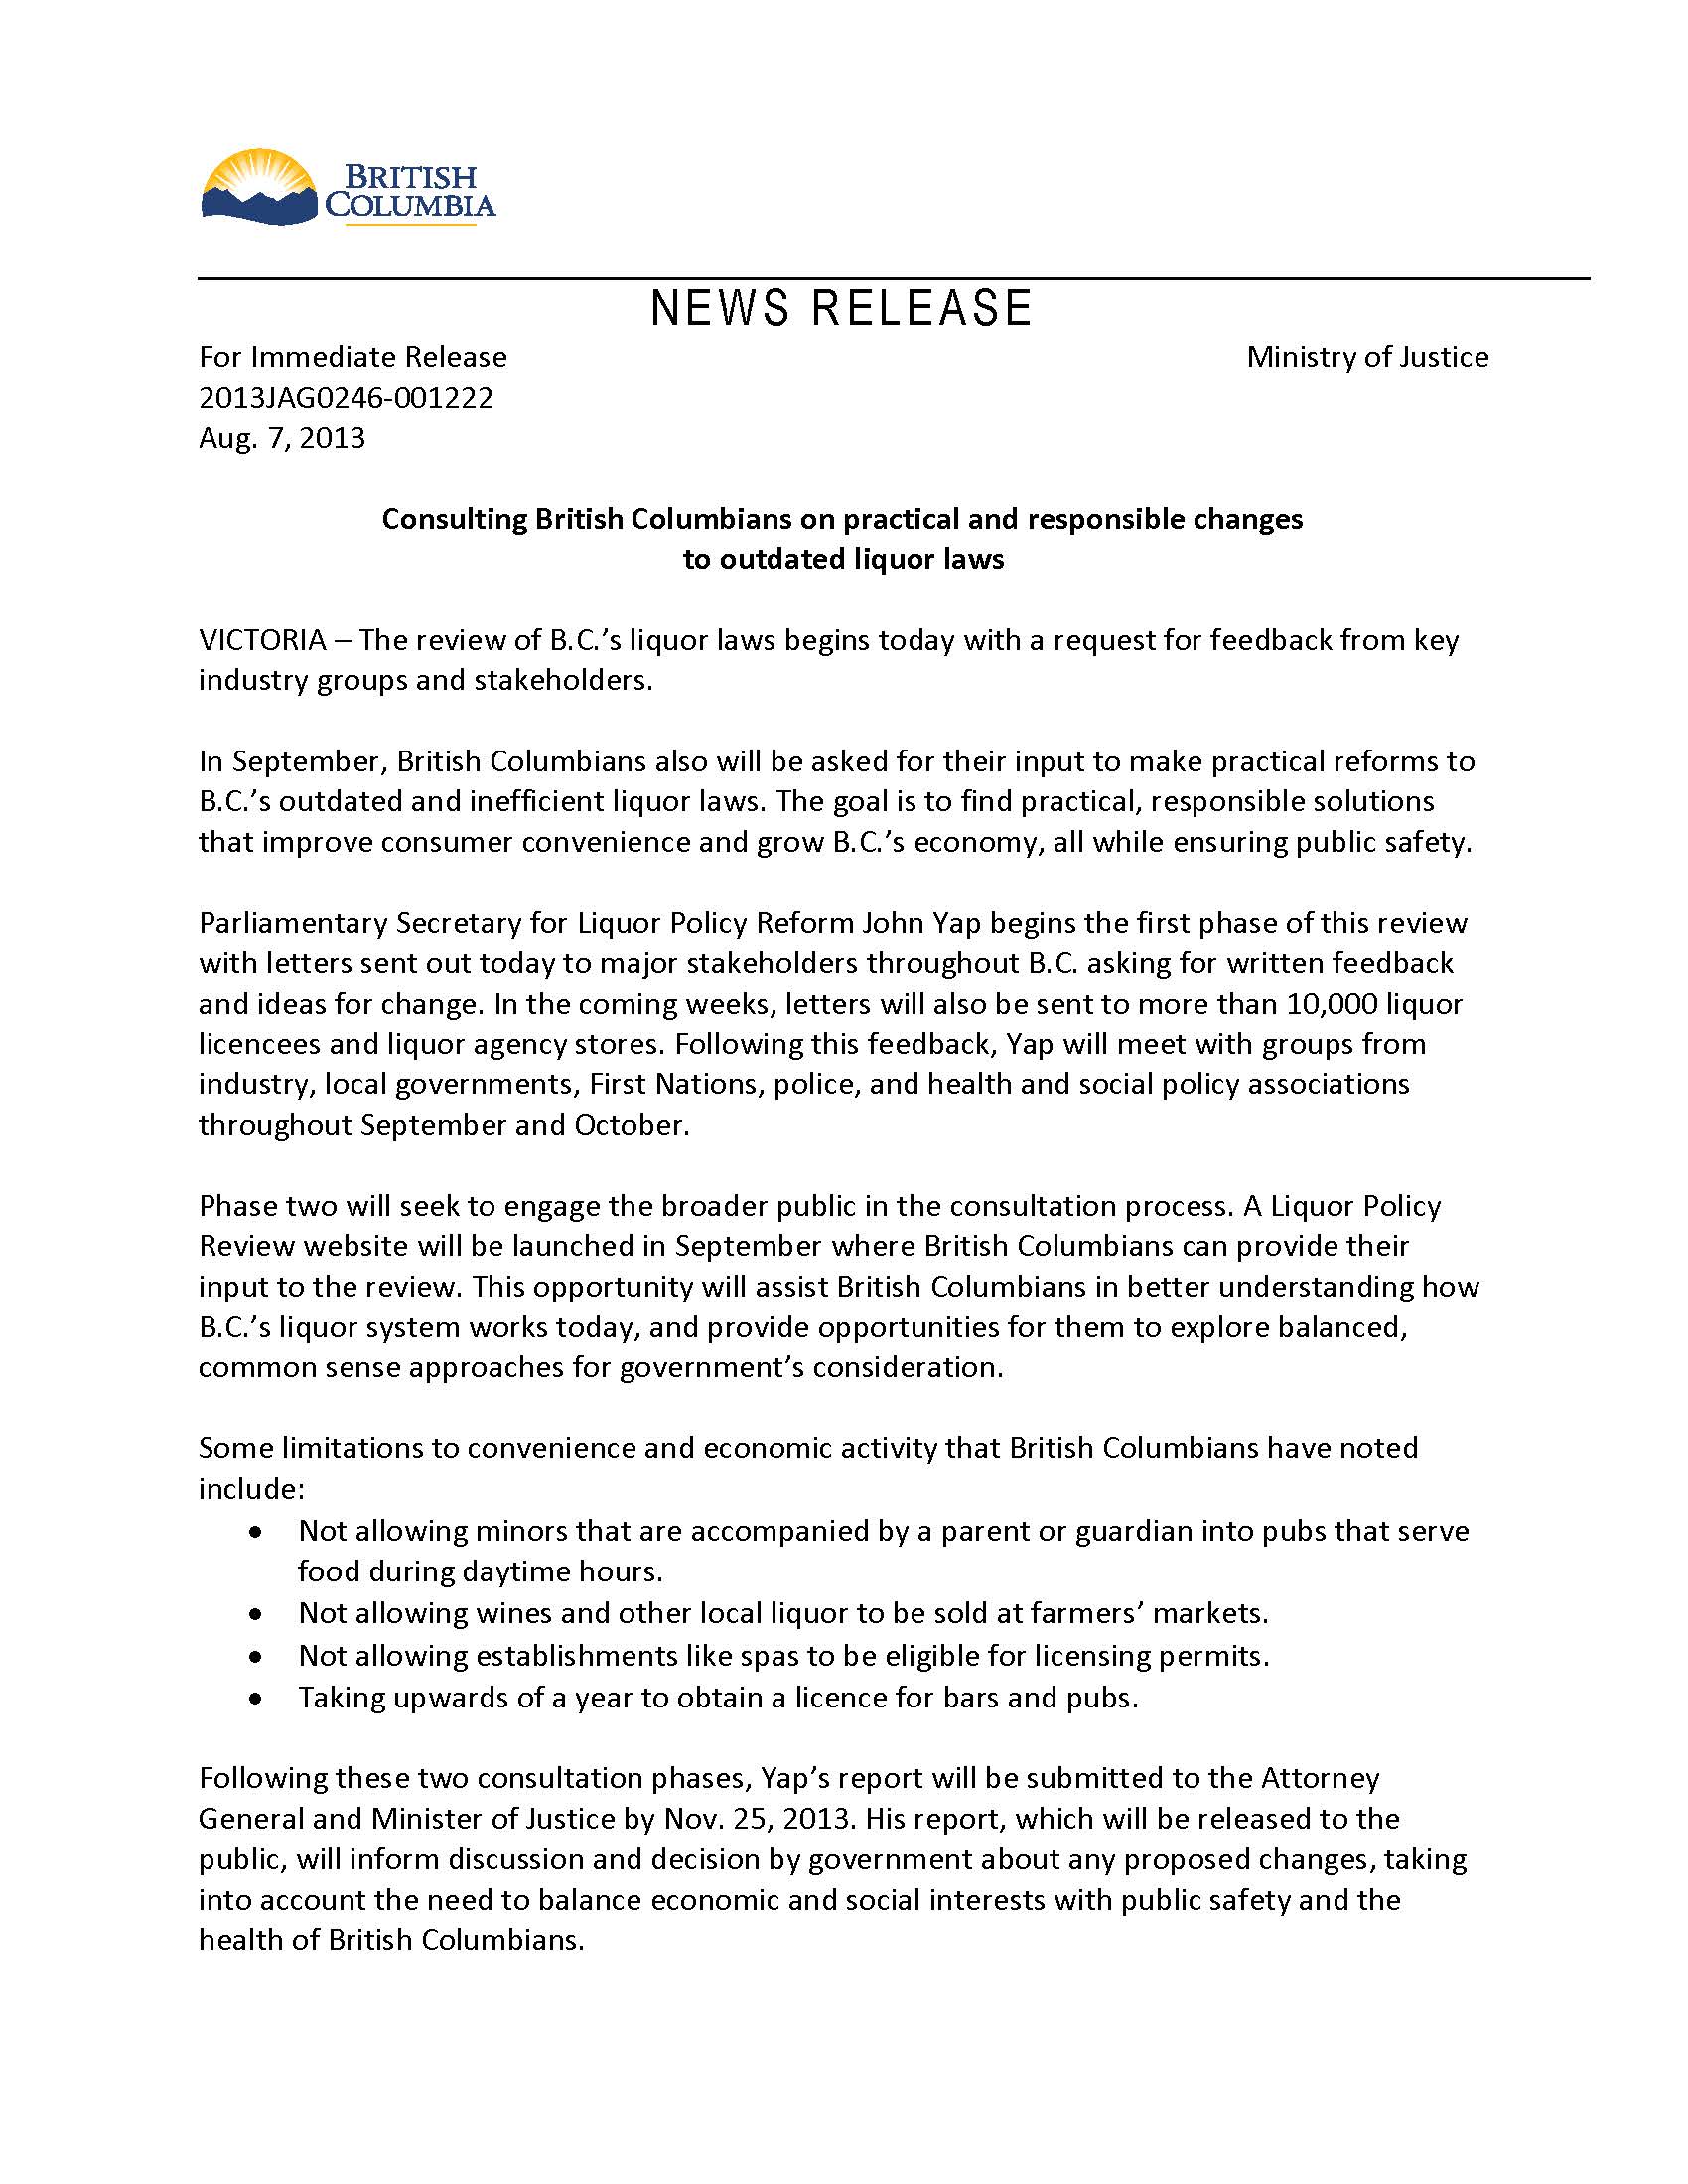 Liquor Law News Release_Page_1